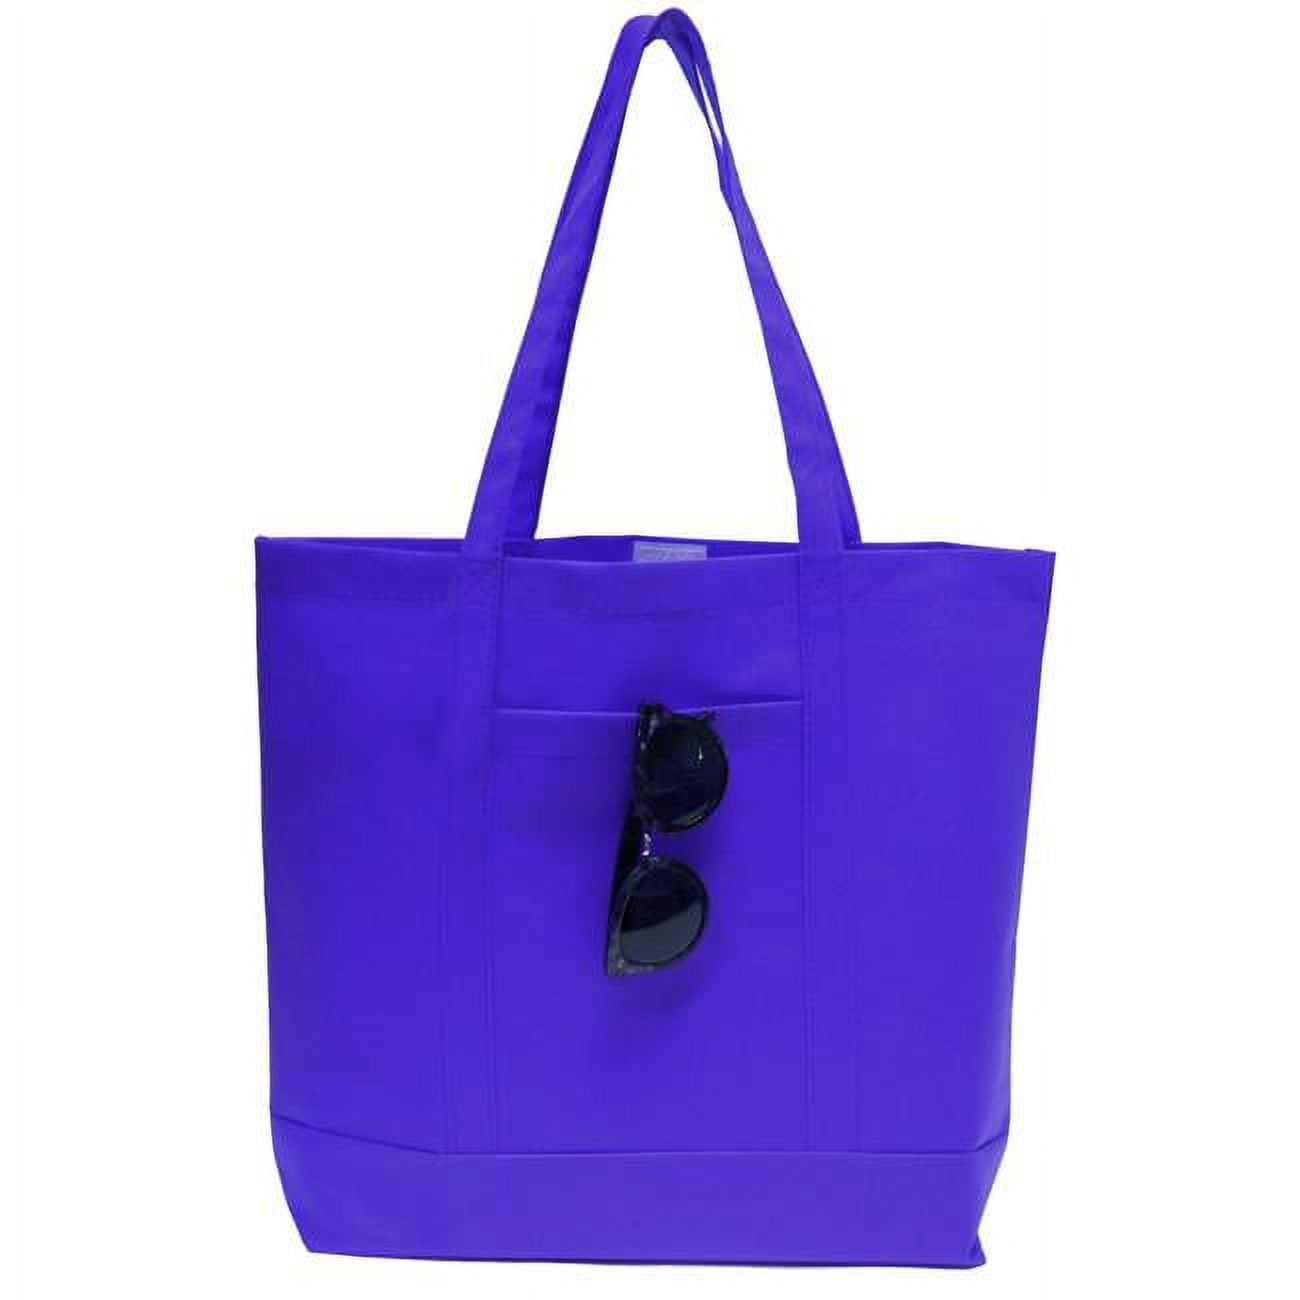 Nw301rbl Non Woven Tote With Pocket, Royal Blue - 10 Pack